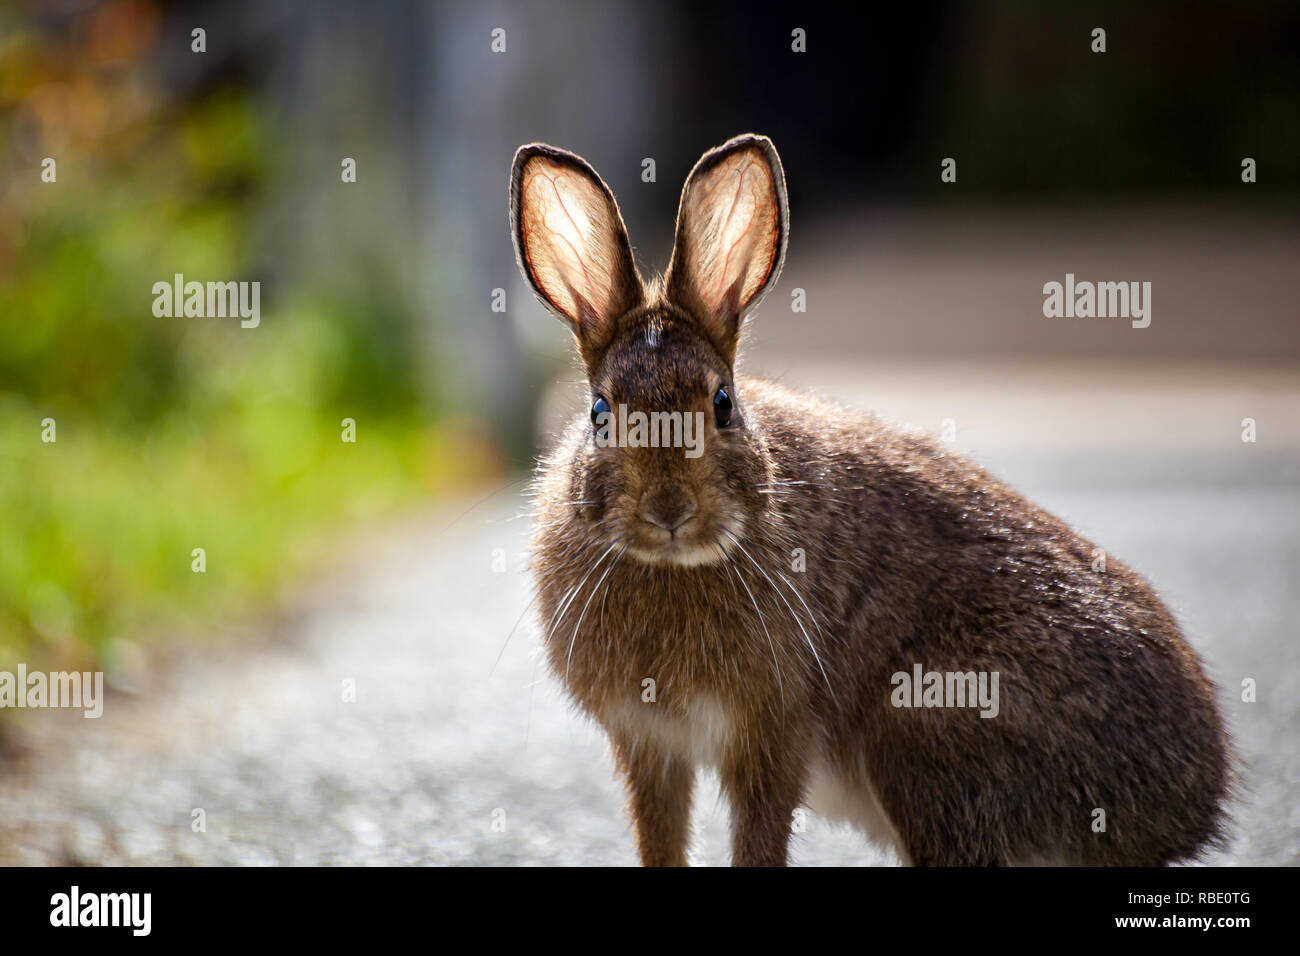 A wild rabbit with backlit ears showing veins staring forward in Olympic National Park, Washington State, USA Stock Photo